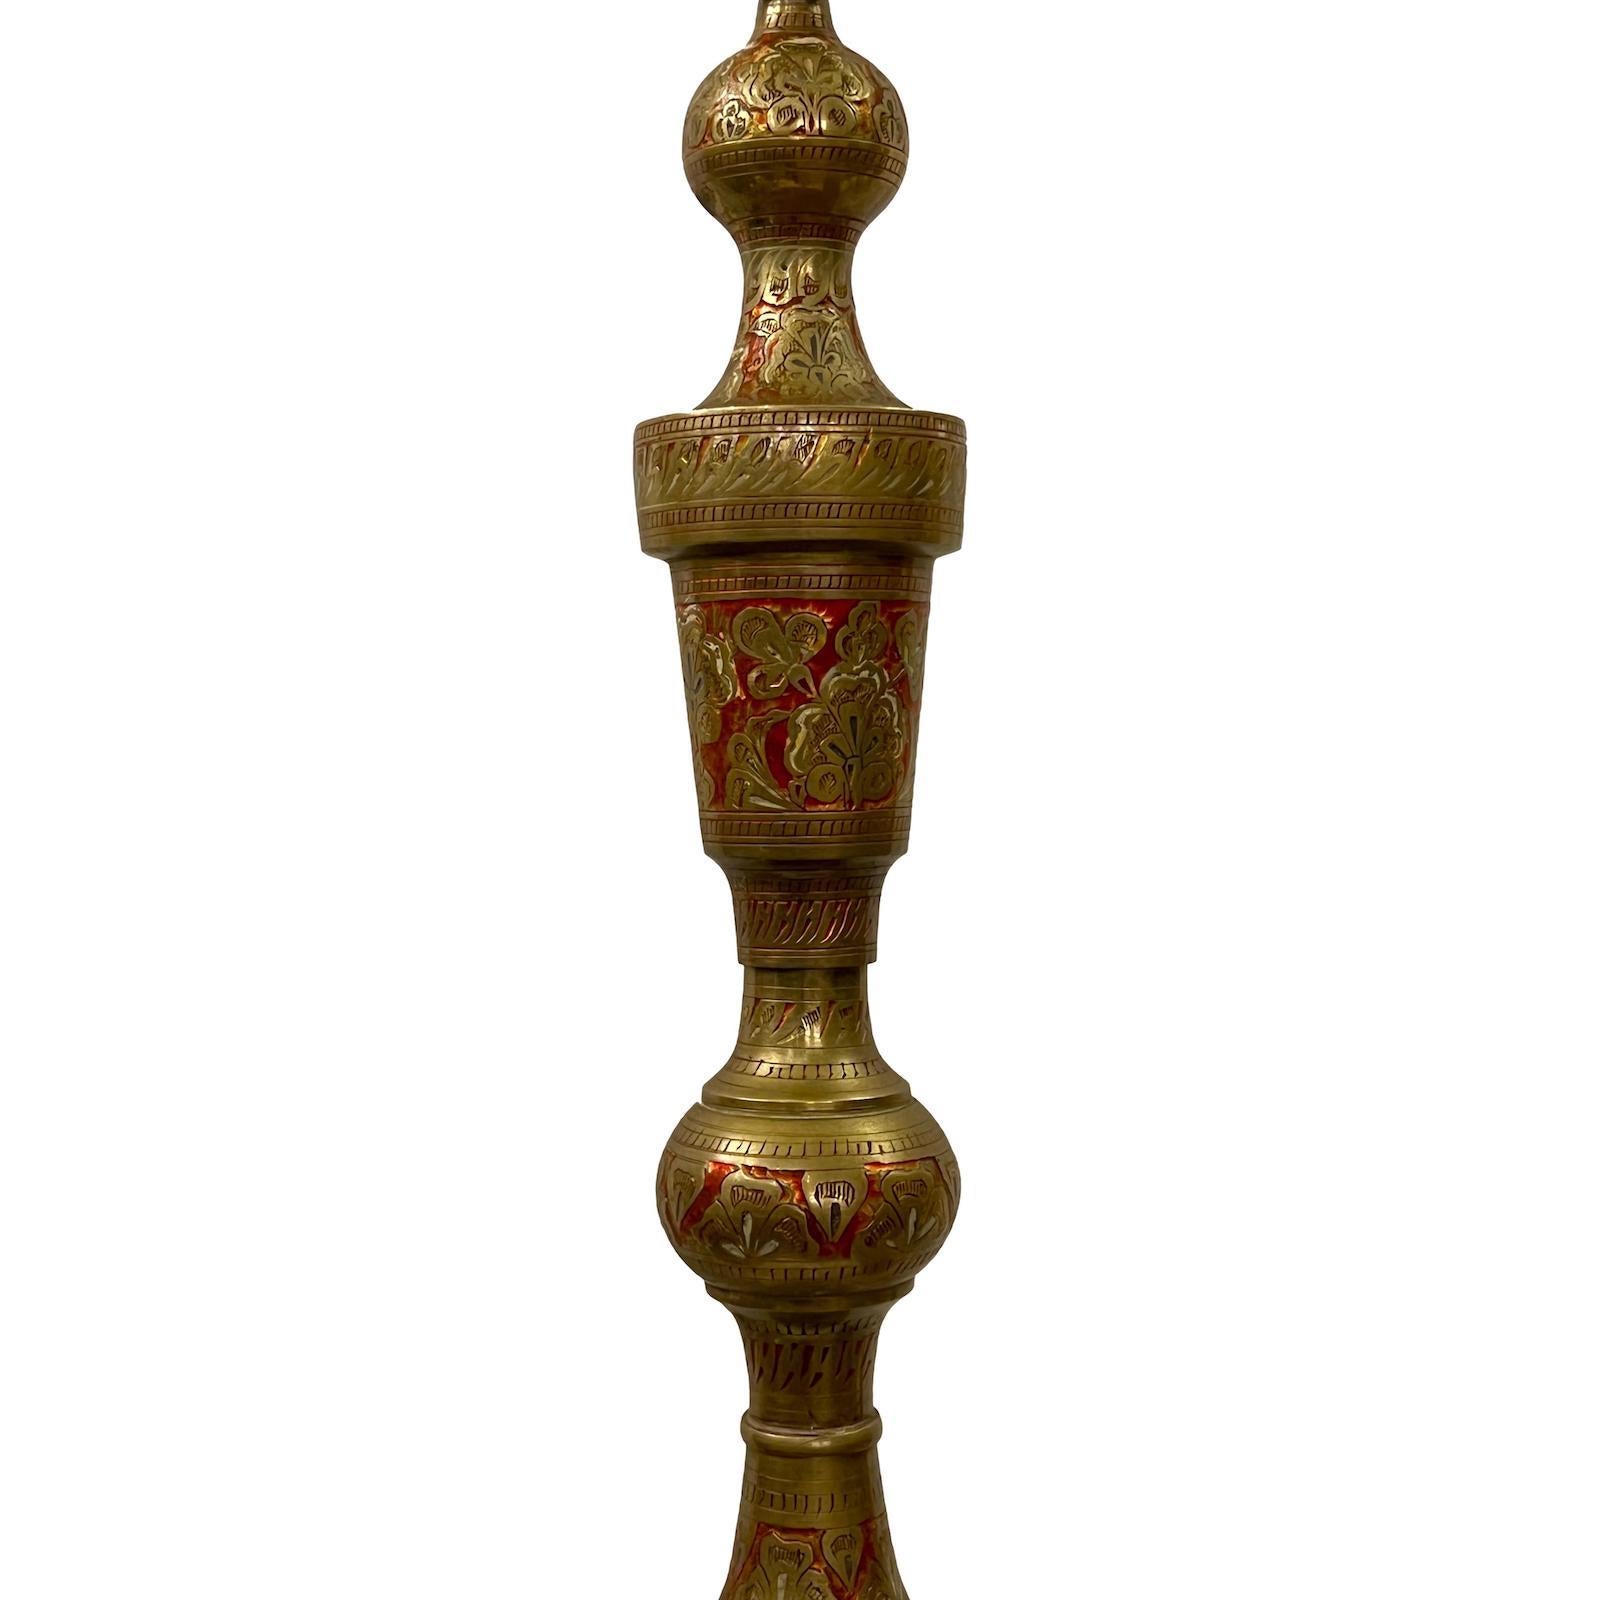 A circa 1940's etched bronze Turkish floor lamp with enamelled decoration.

Measurements:
Height of body: 53.5